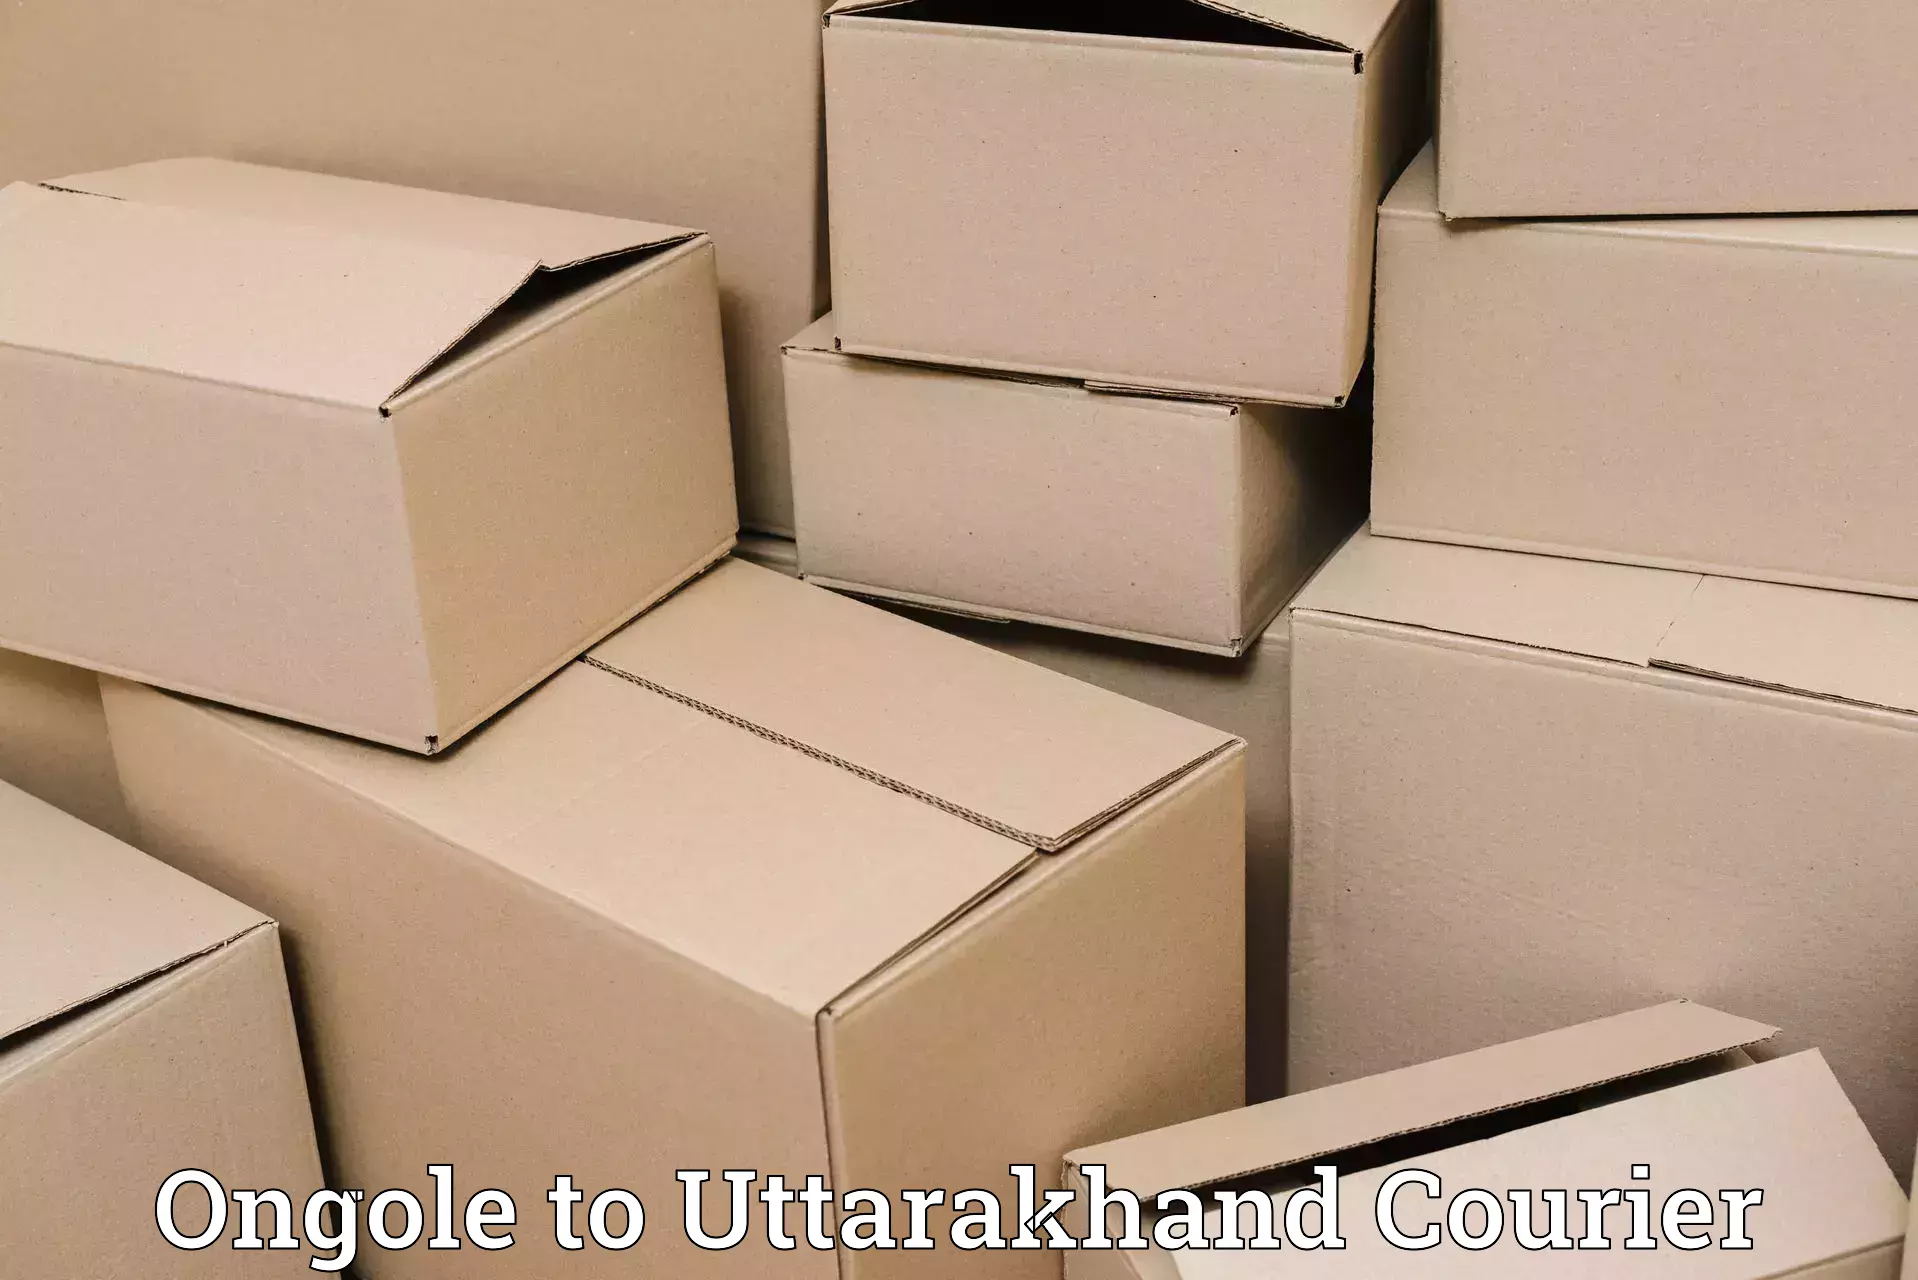 Fast-track shipping solutions Ongole to Tehri Garhwal